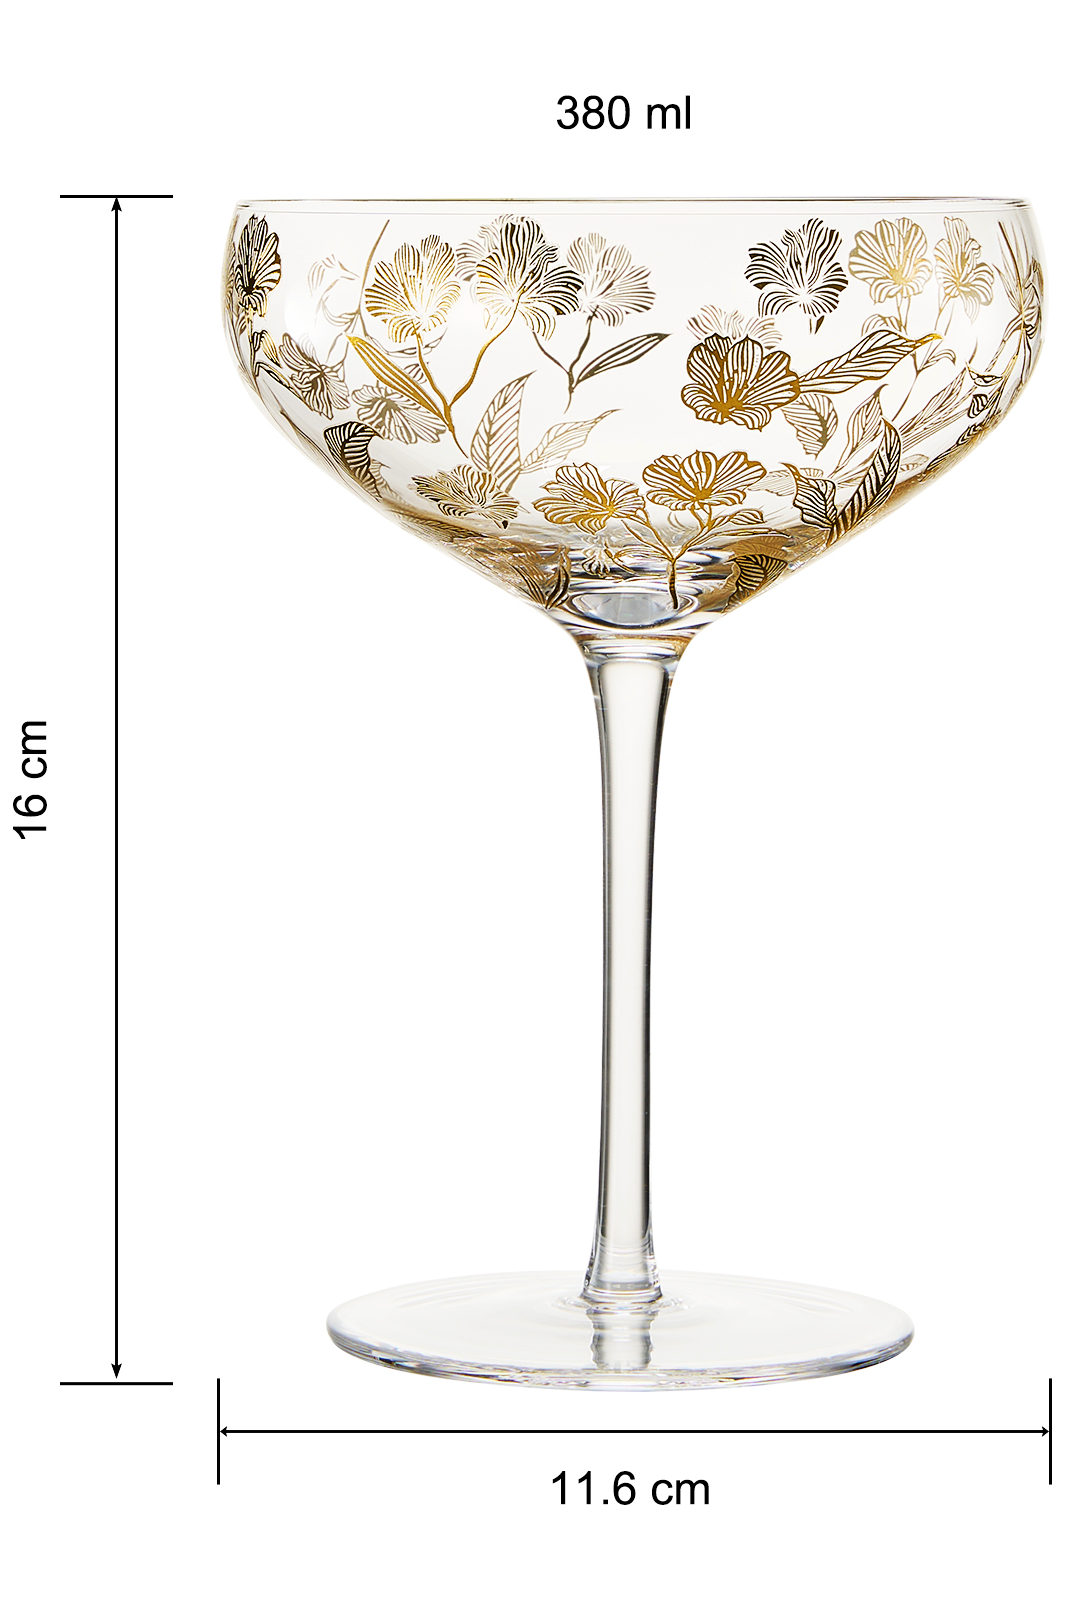 Vintage Gold Floral Champagne Coupe s/2